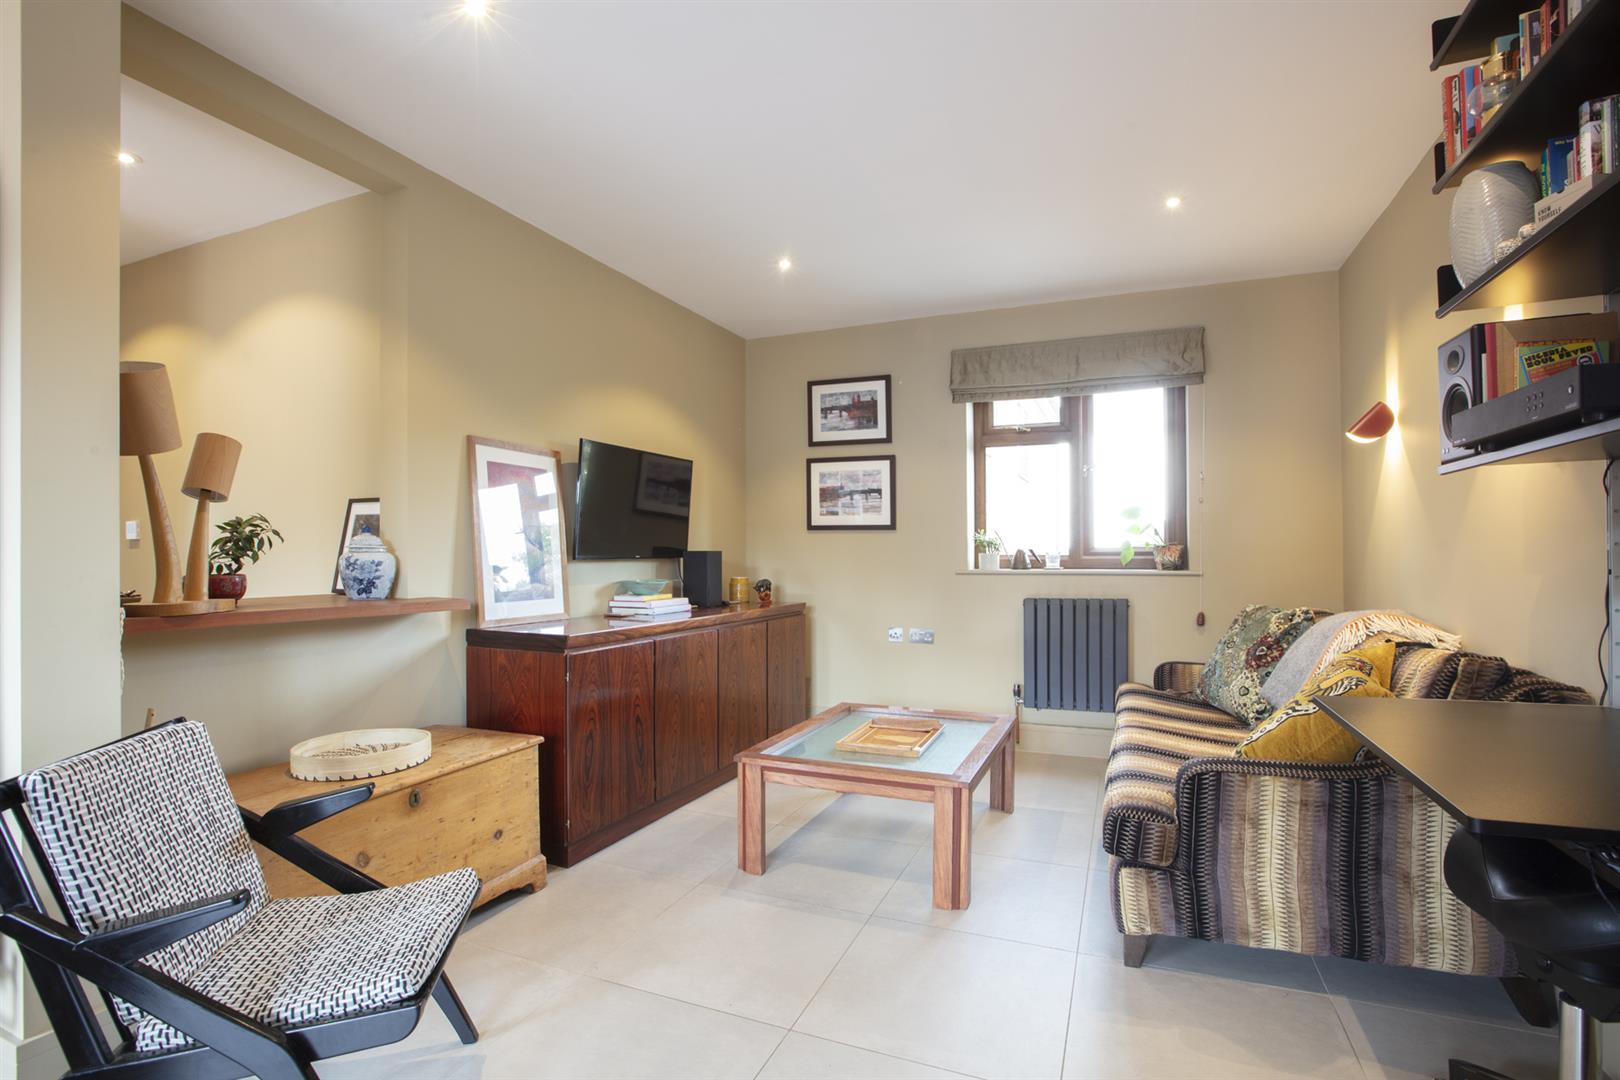 Flat - Purpose Built Sold in Gibbon Road, Nunhead, SE15 996 view9